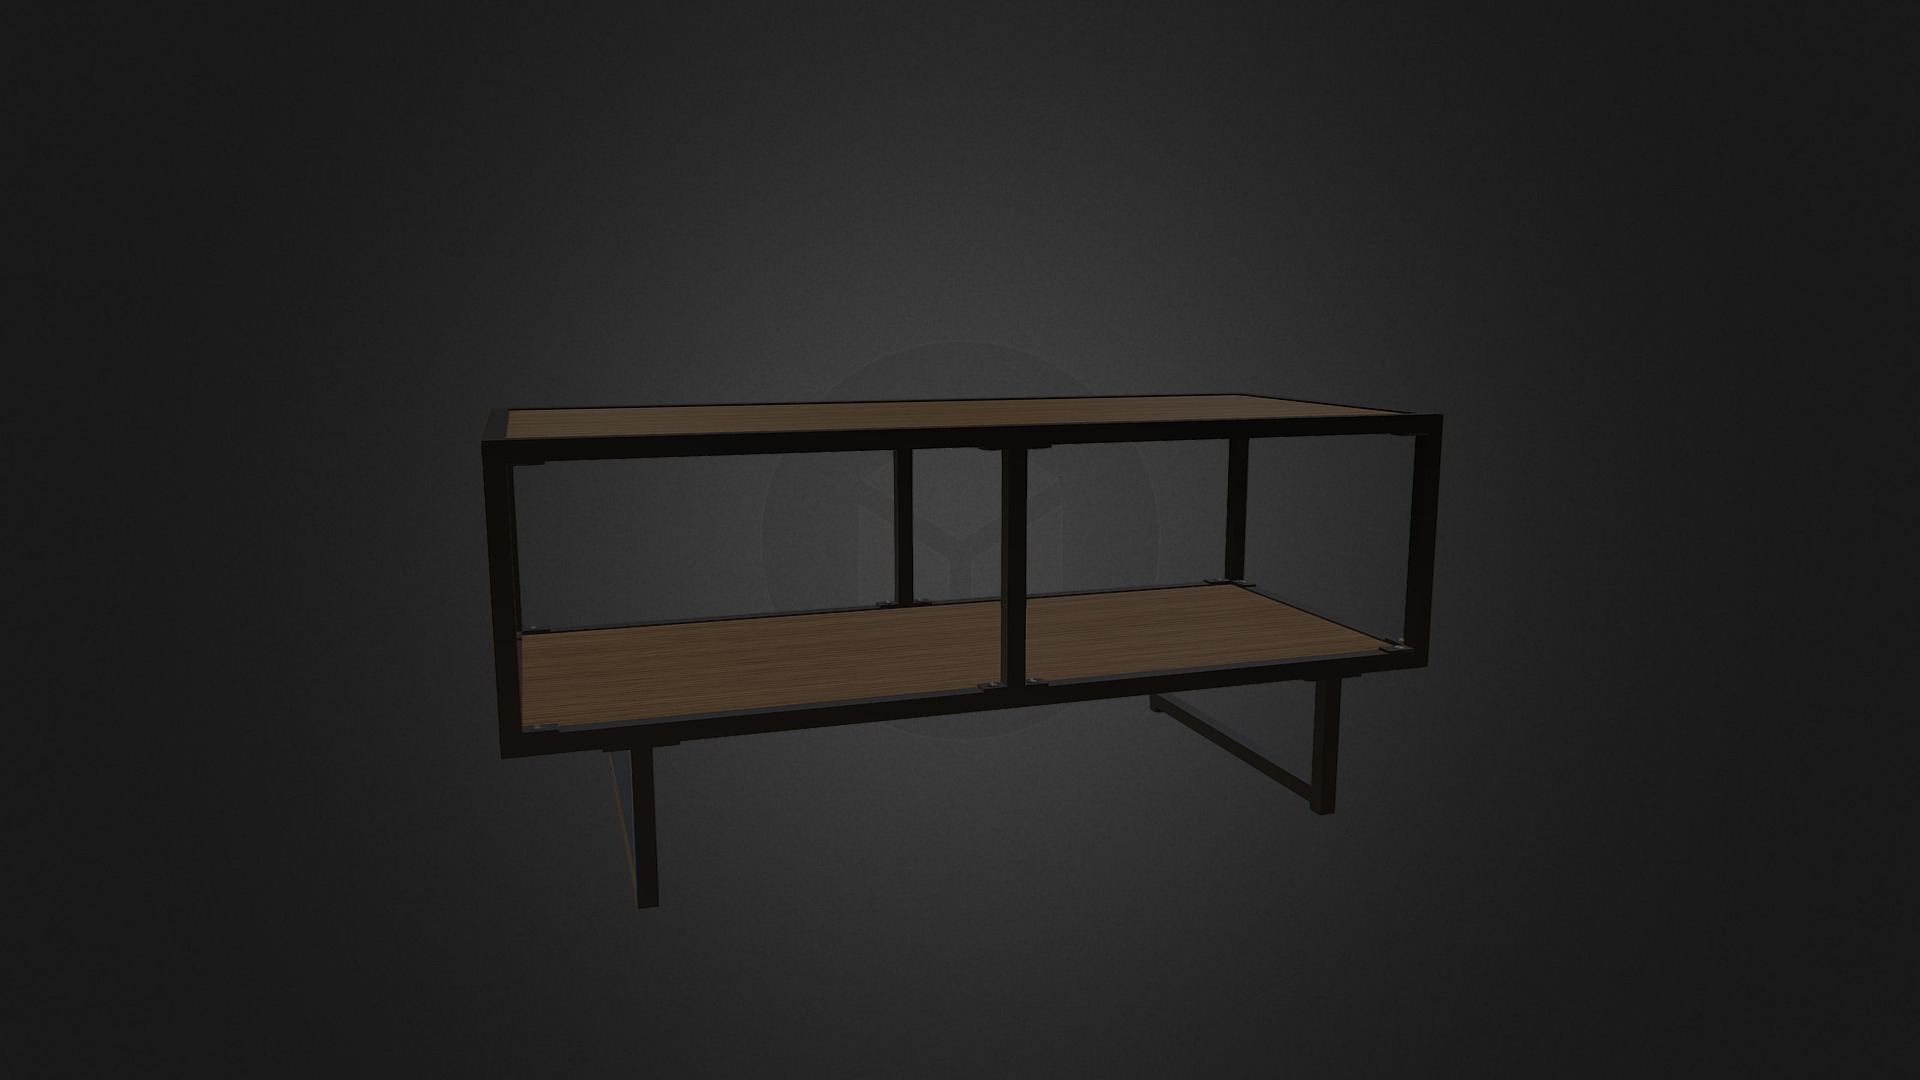 3D model Emmett TV Stand - This is a 3D model of the Emmett TV Stand. The 3D model is about a table with a glass top.